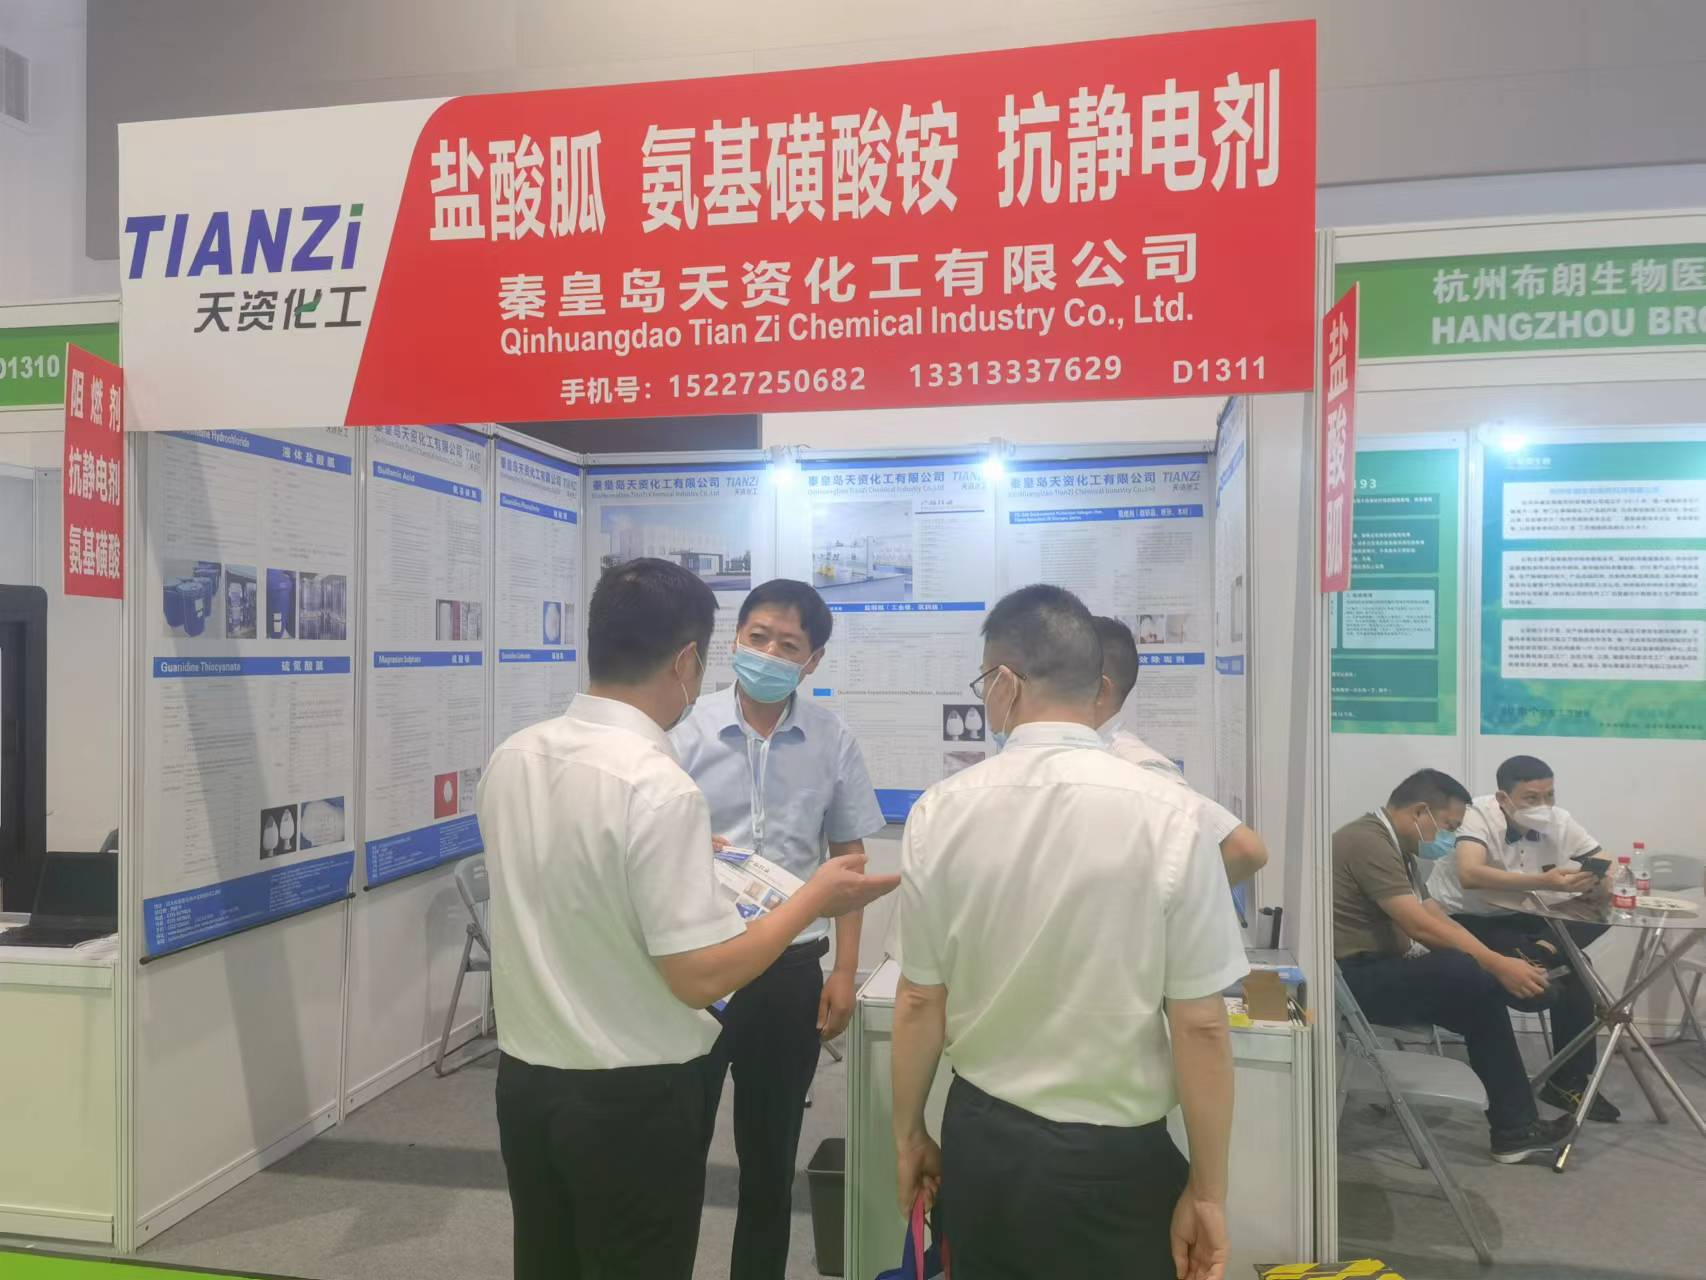 From September 7th to 9th, the 21st International Dyestuff Exhibition Tianzi Chemical is looking forward to your arrival